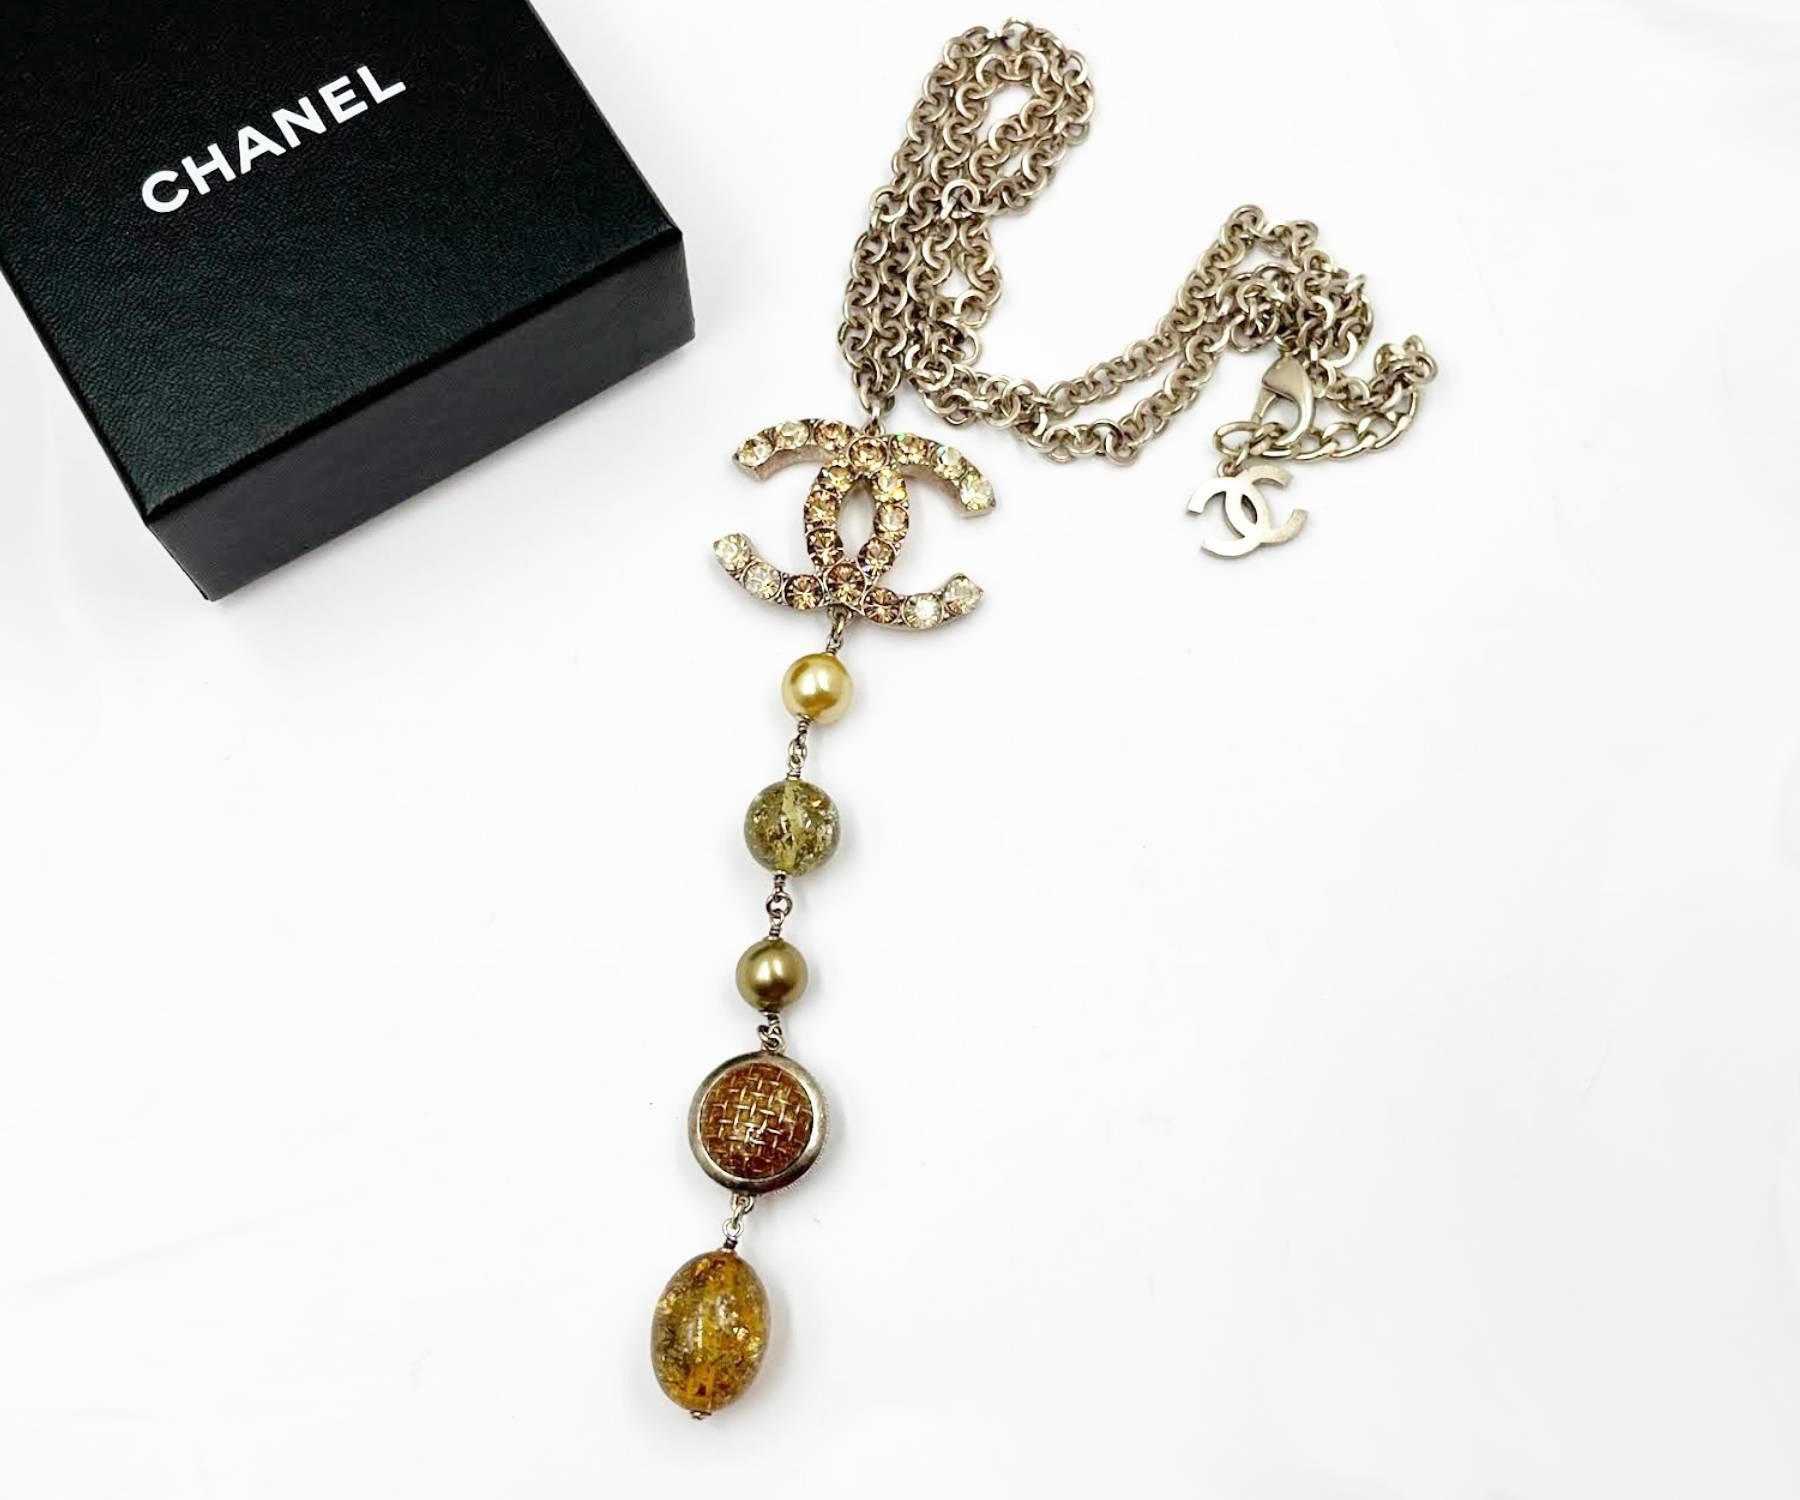 Chanel Rare Gold CC Shiny Gold Crystal Pearl Bead Long Dangle Pendant Necklace

*Marked 06
*Made in France
*Comes with the original box

-The pendant is approximately 5.75″ x 1.5″.
-The longest chain is approximately 26″ long.
-Very classic and